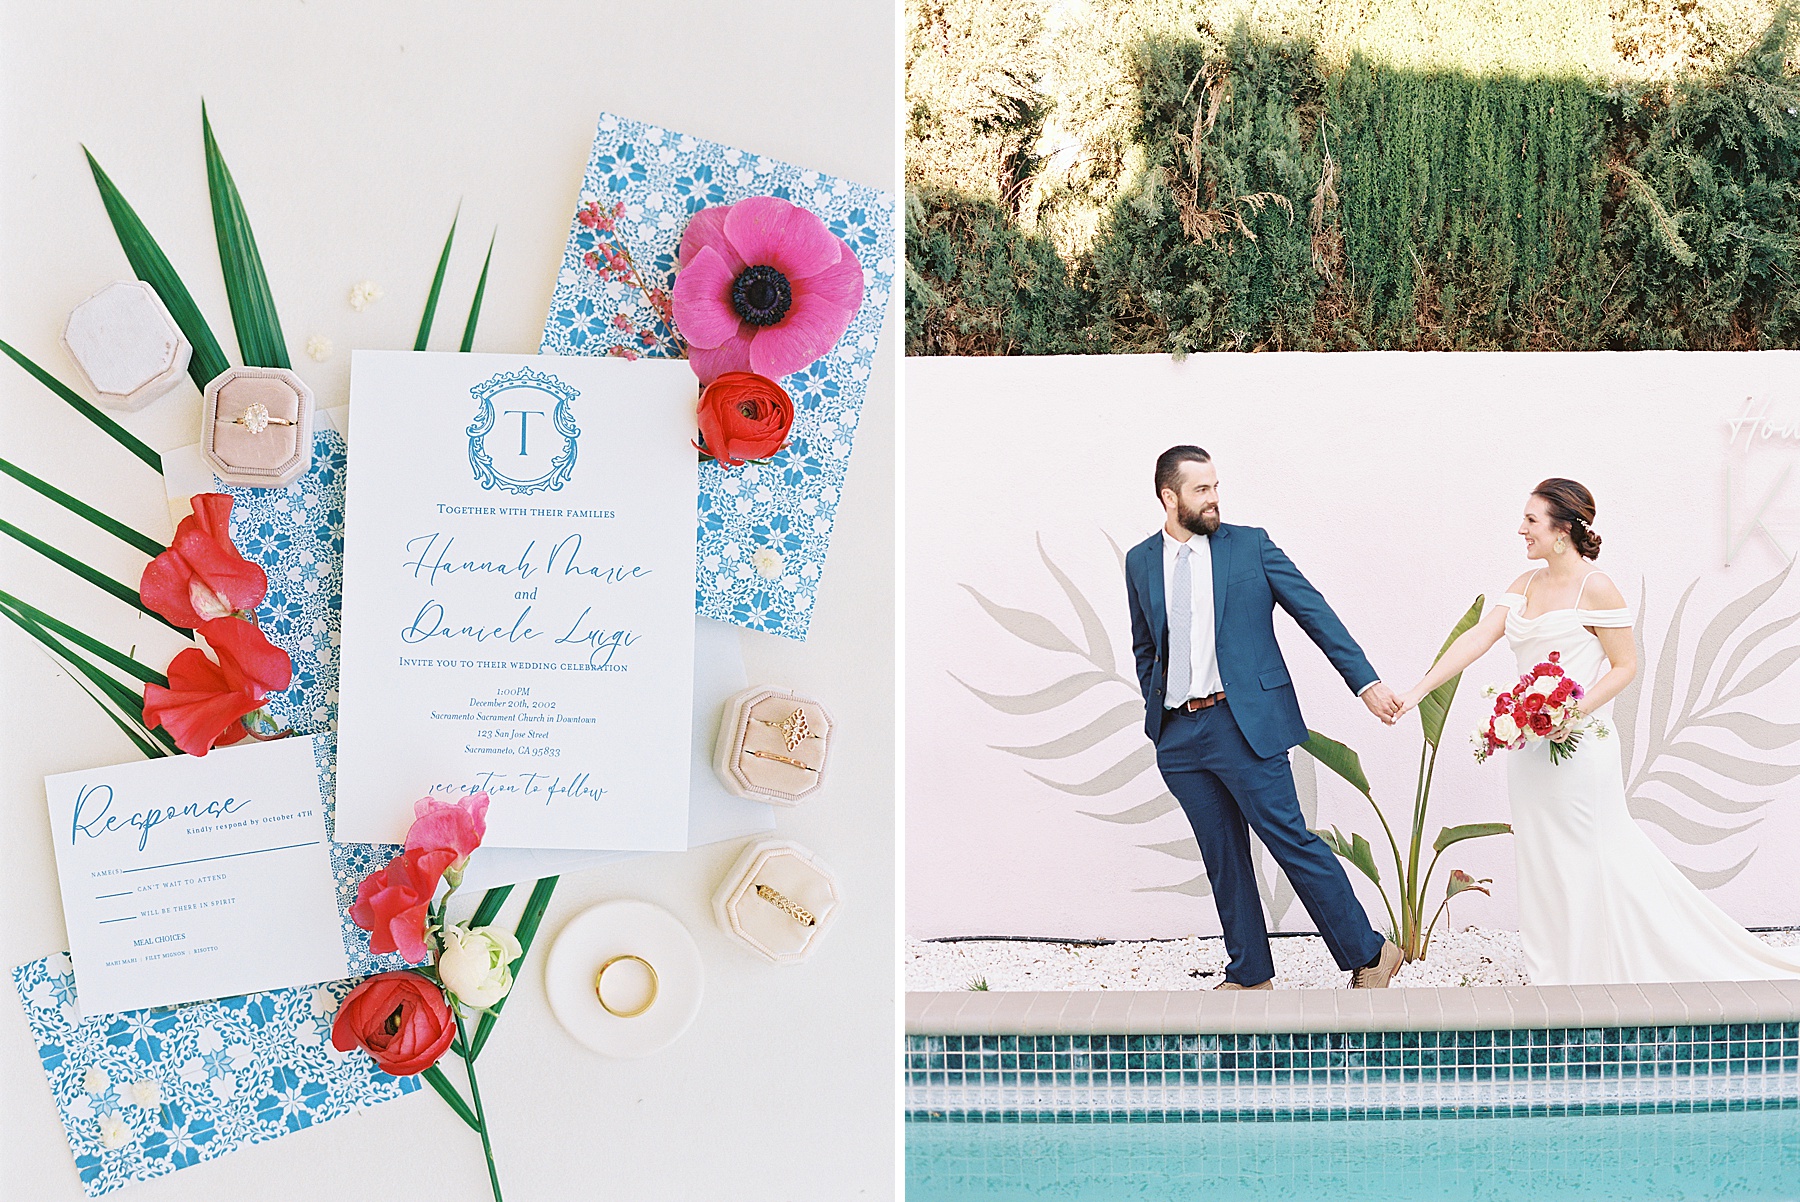 Grecian Inspired Micro-Wedding with Events by Kristina Elyse - Ash Baumgartner - Inspired by This - Sonoma Wedding Photographer_0021.jpg